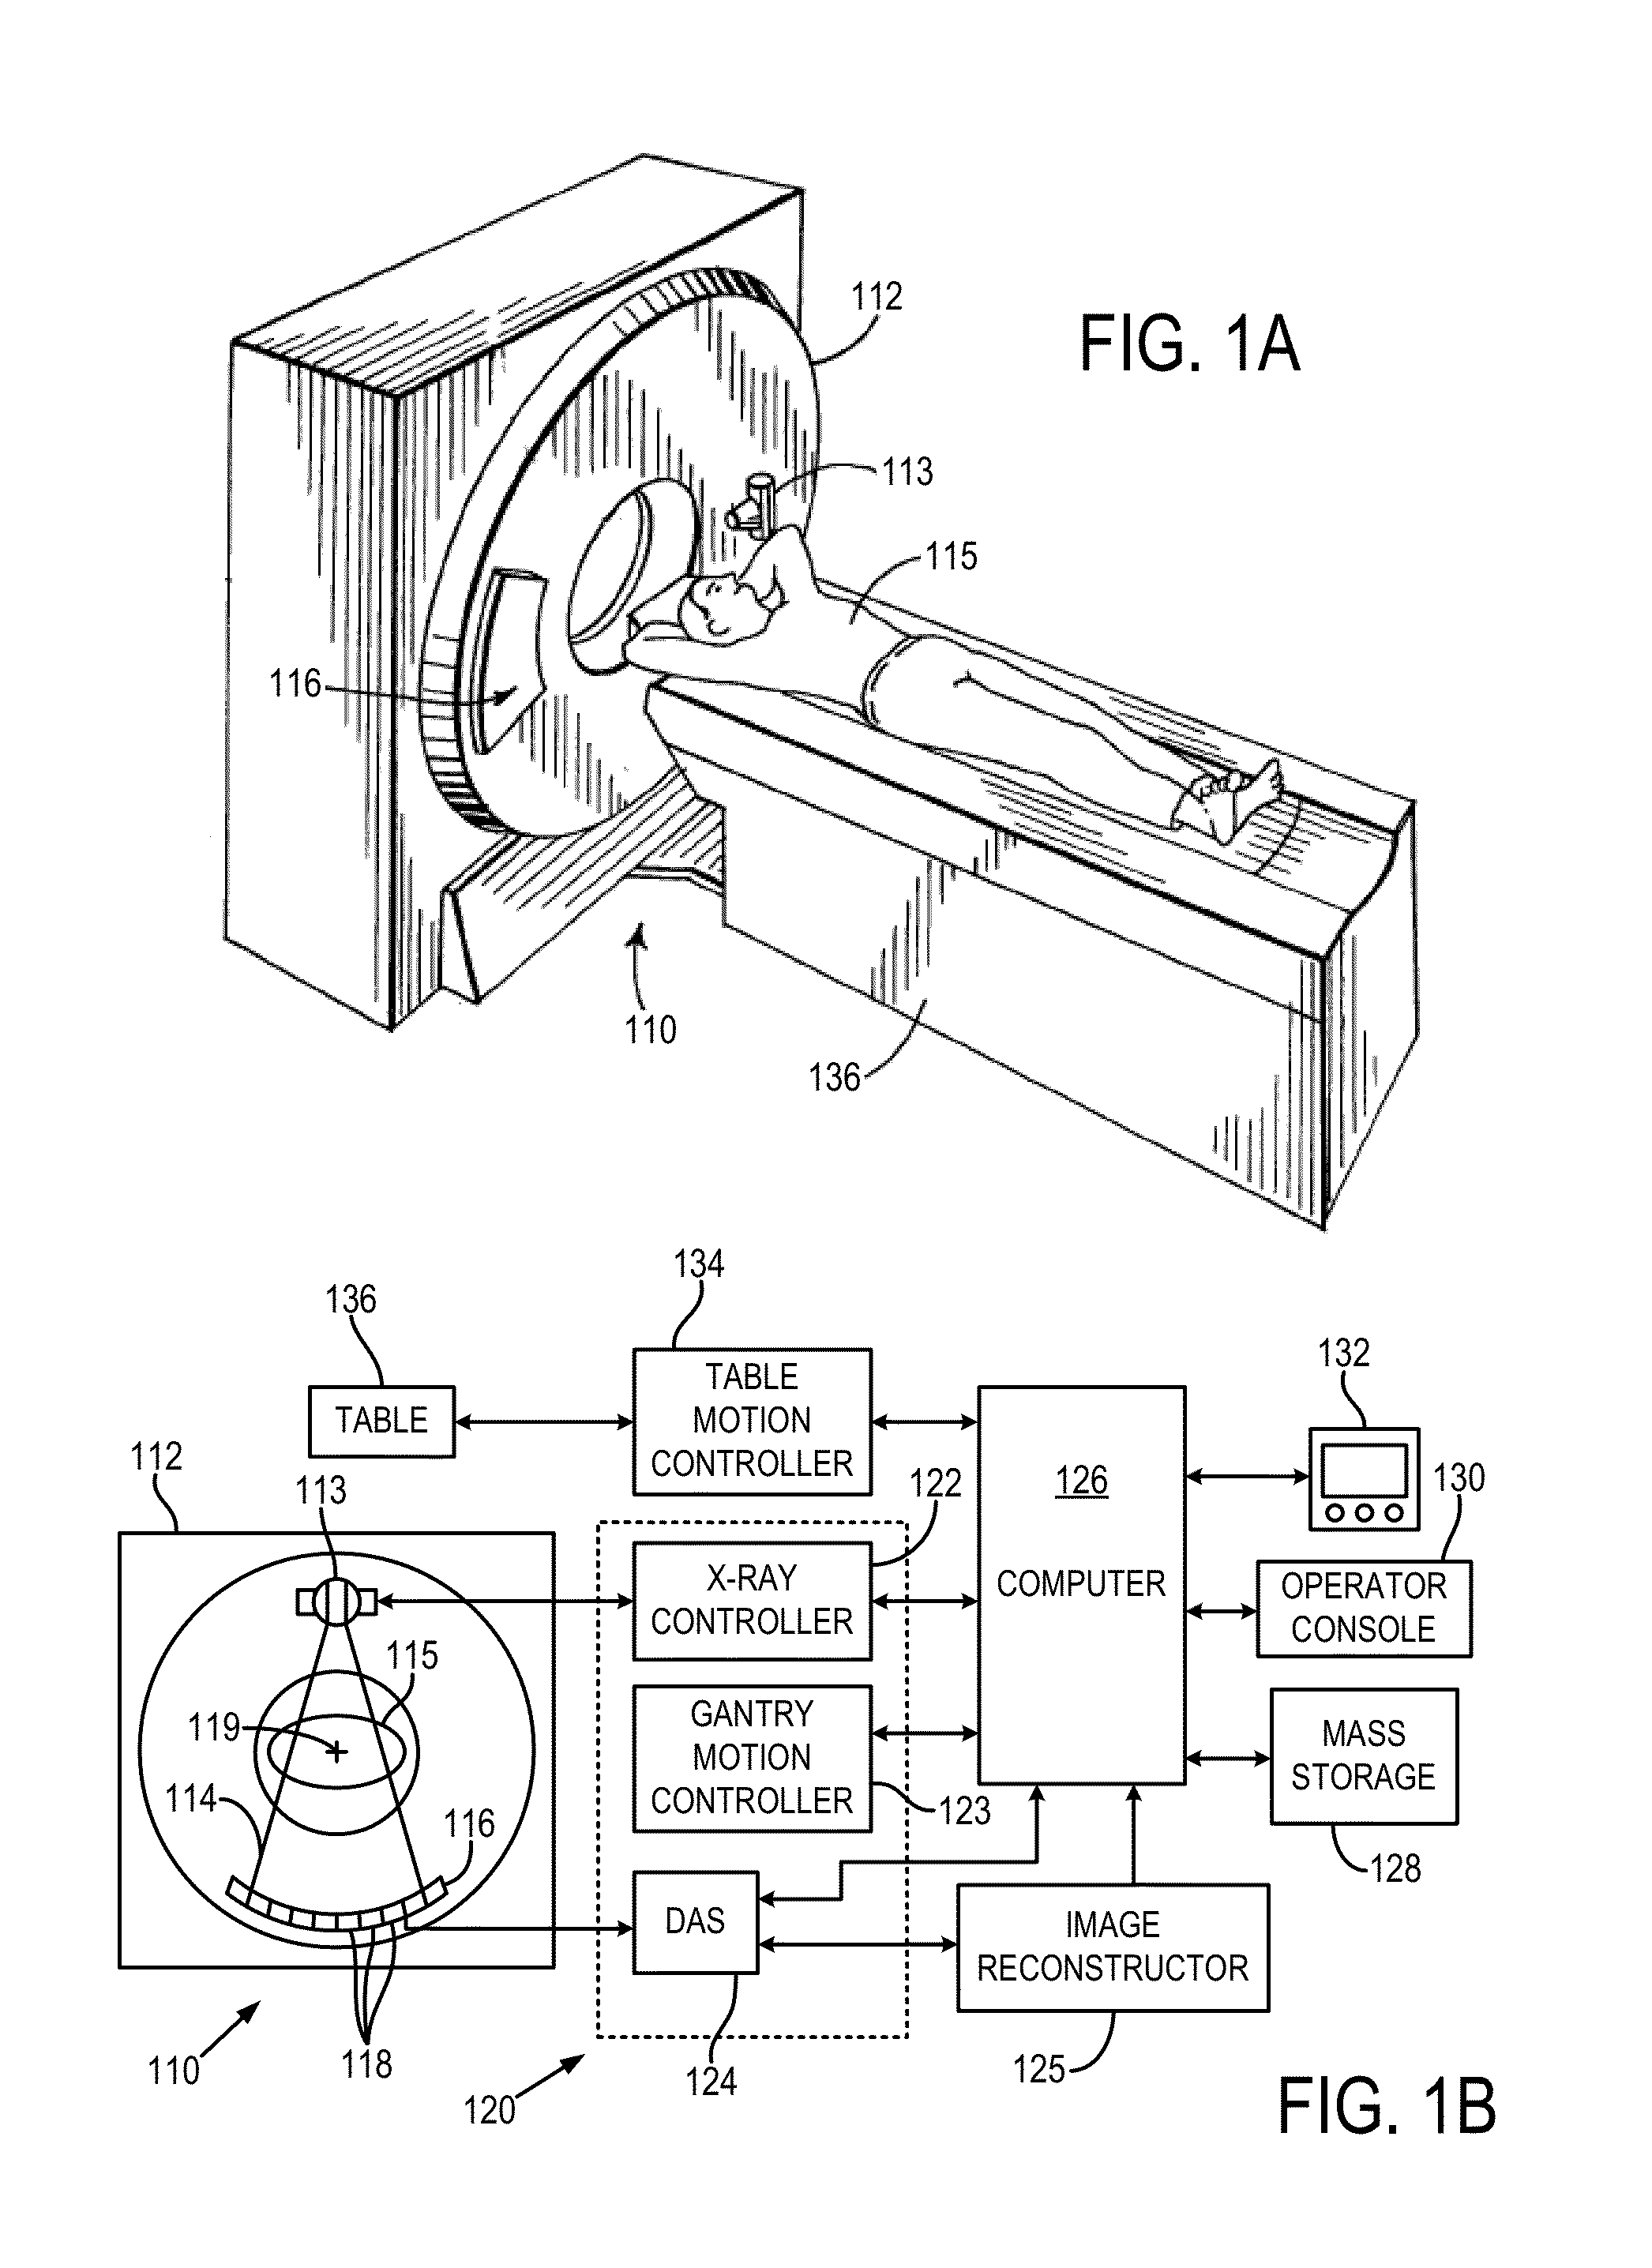 System and Method for Controlling Radiation Dose for Radiological Applications